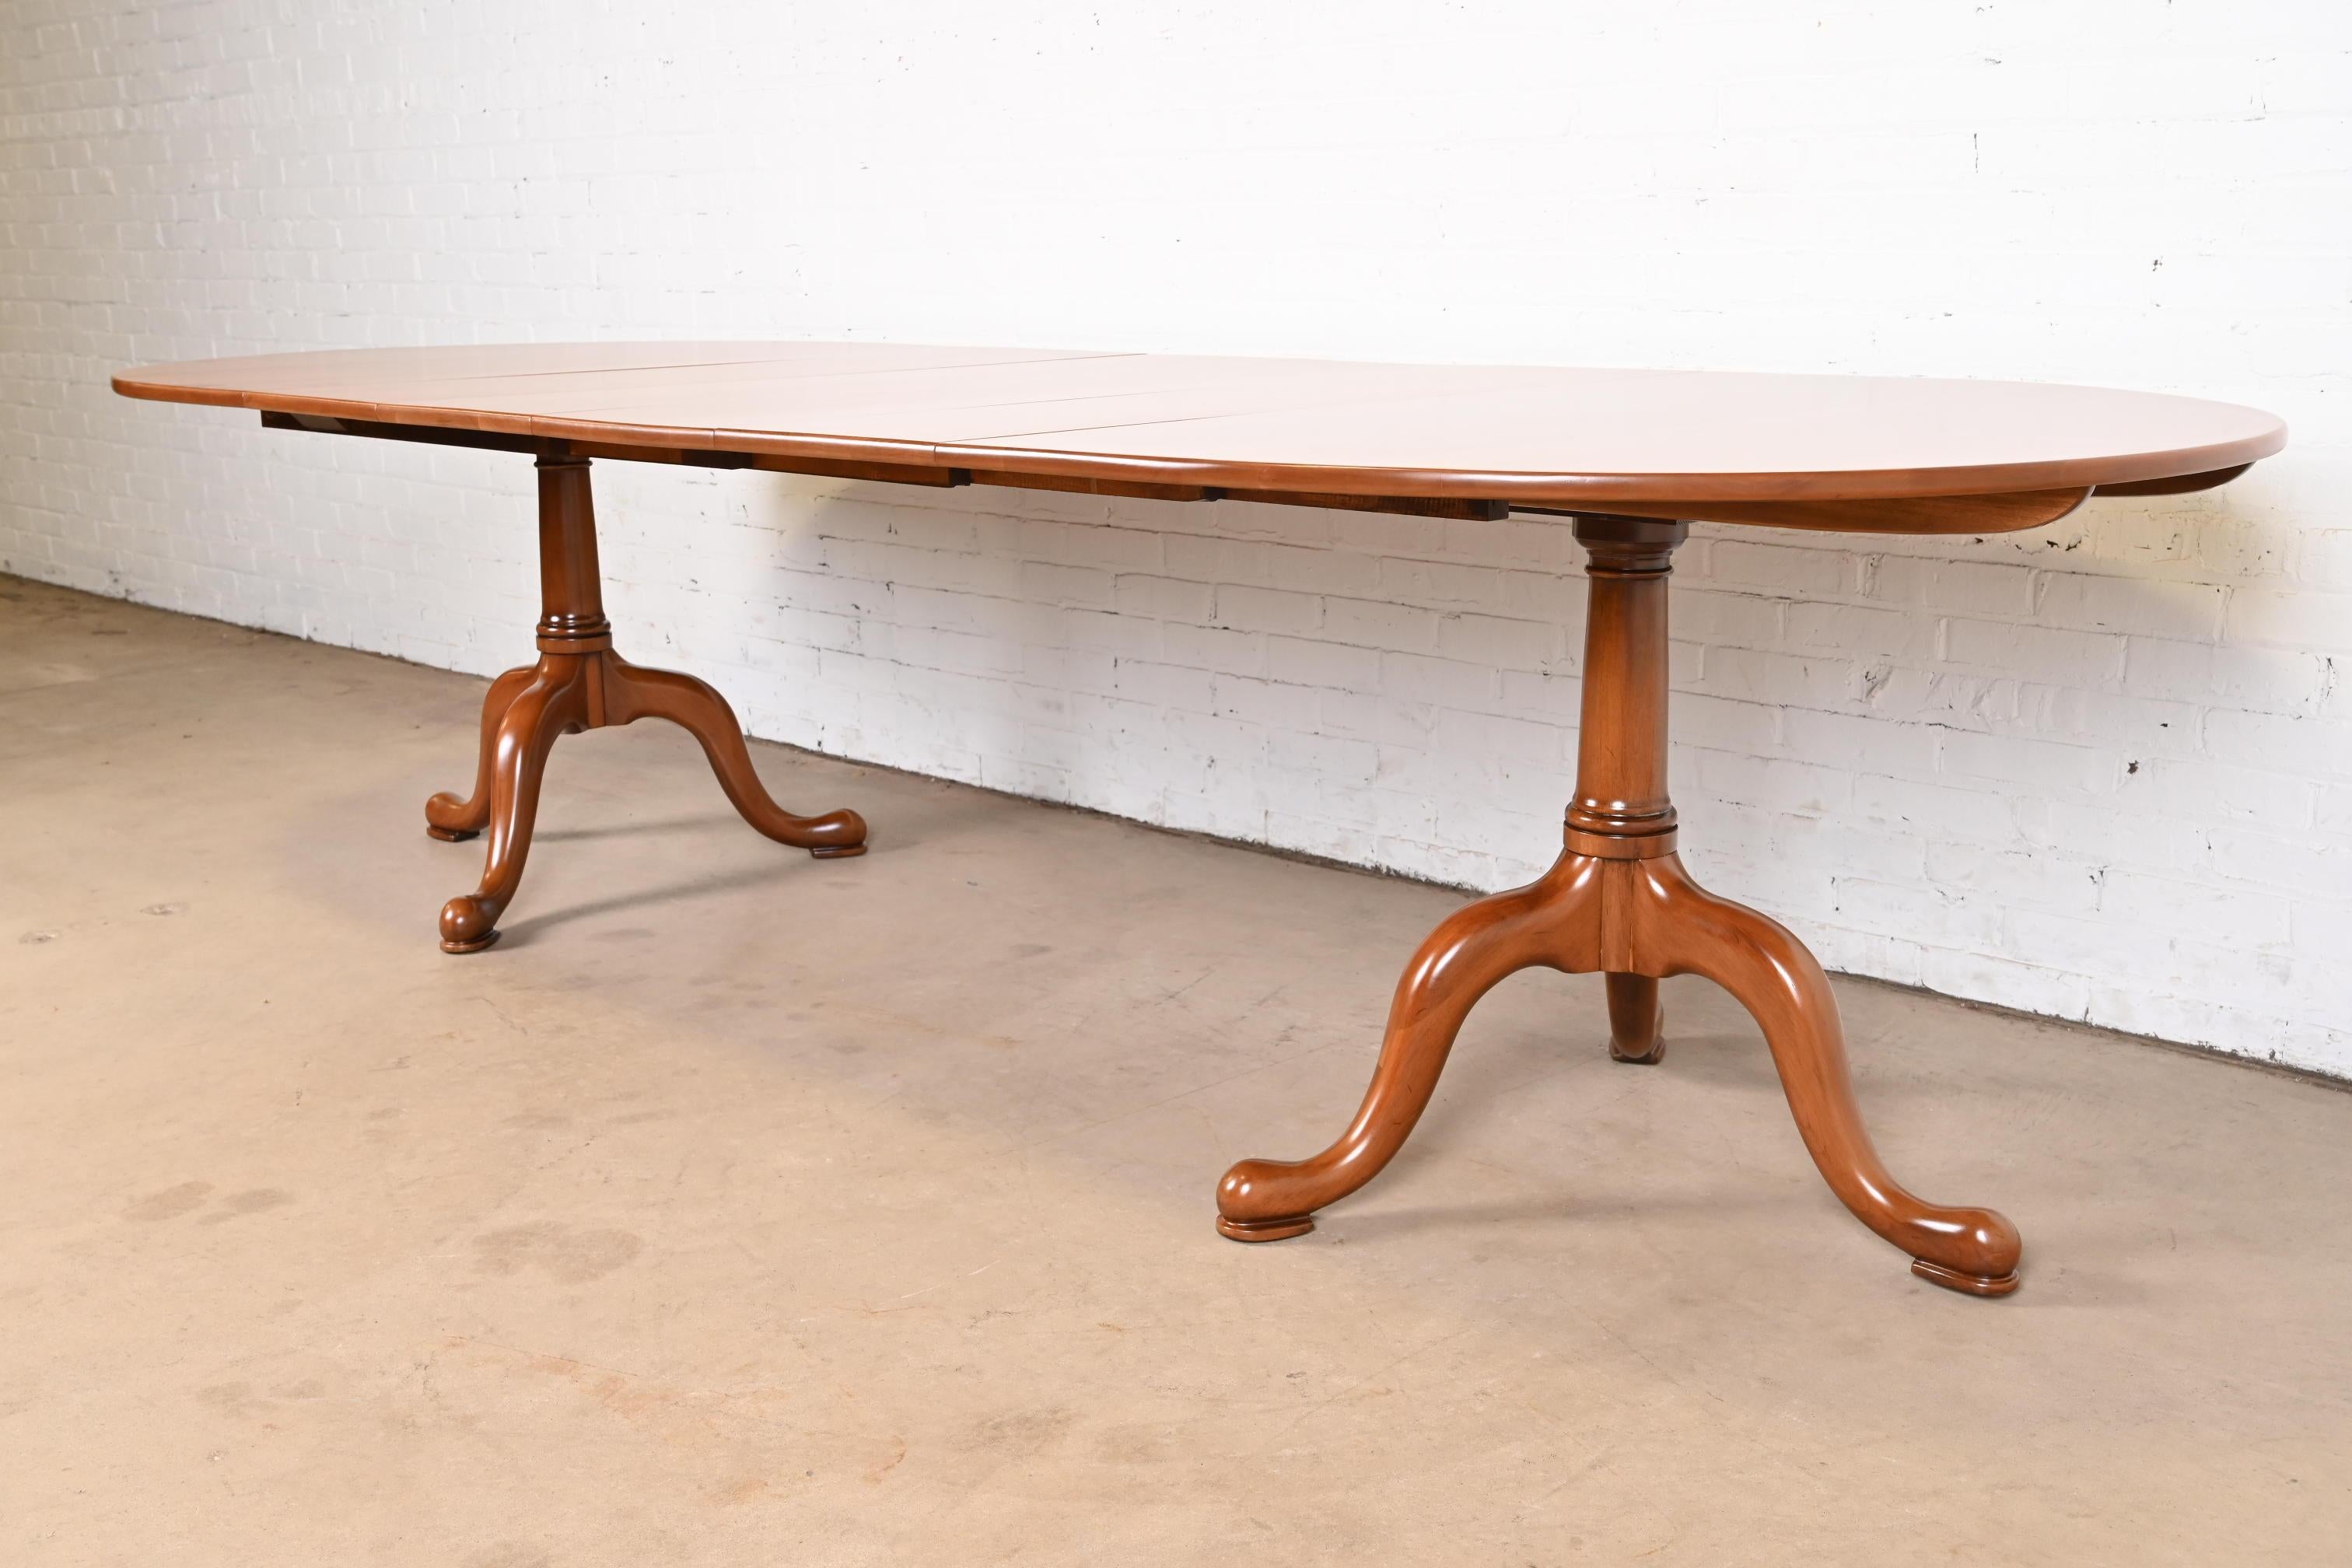 Henkel Harris Georgian Solid Cherry Wood Double Pedestal Extension Dining Table In Good Condition For Sale In South Bend, IN